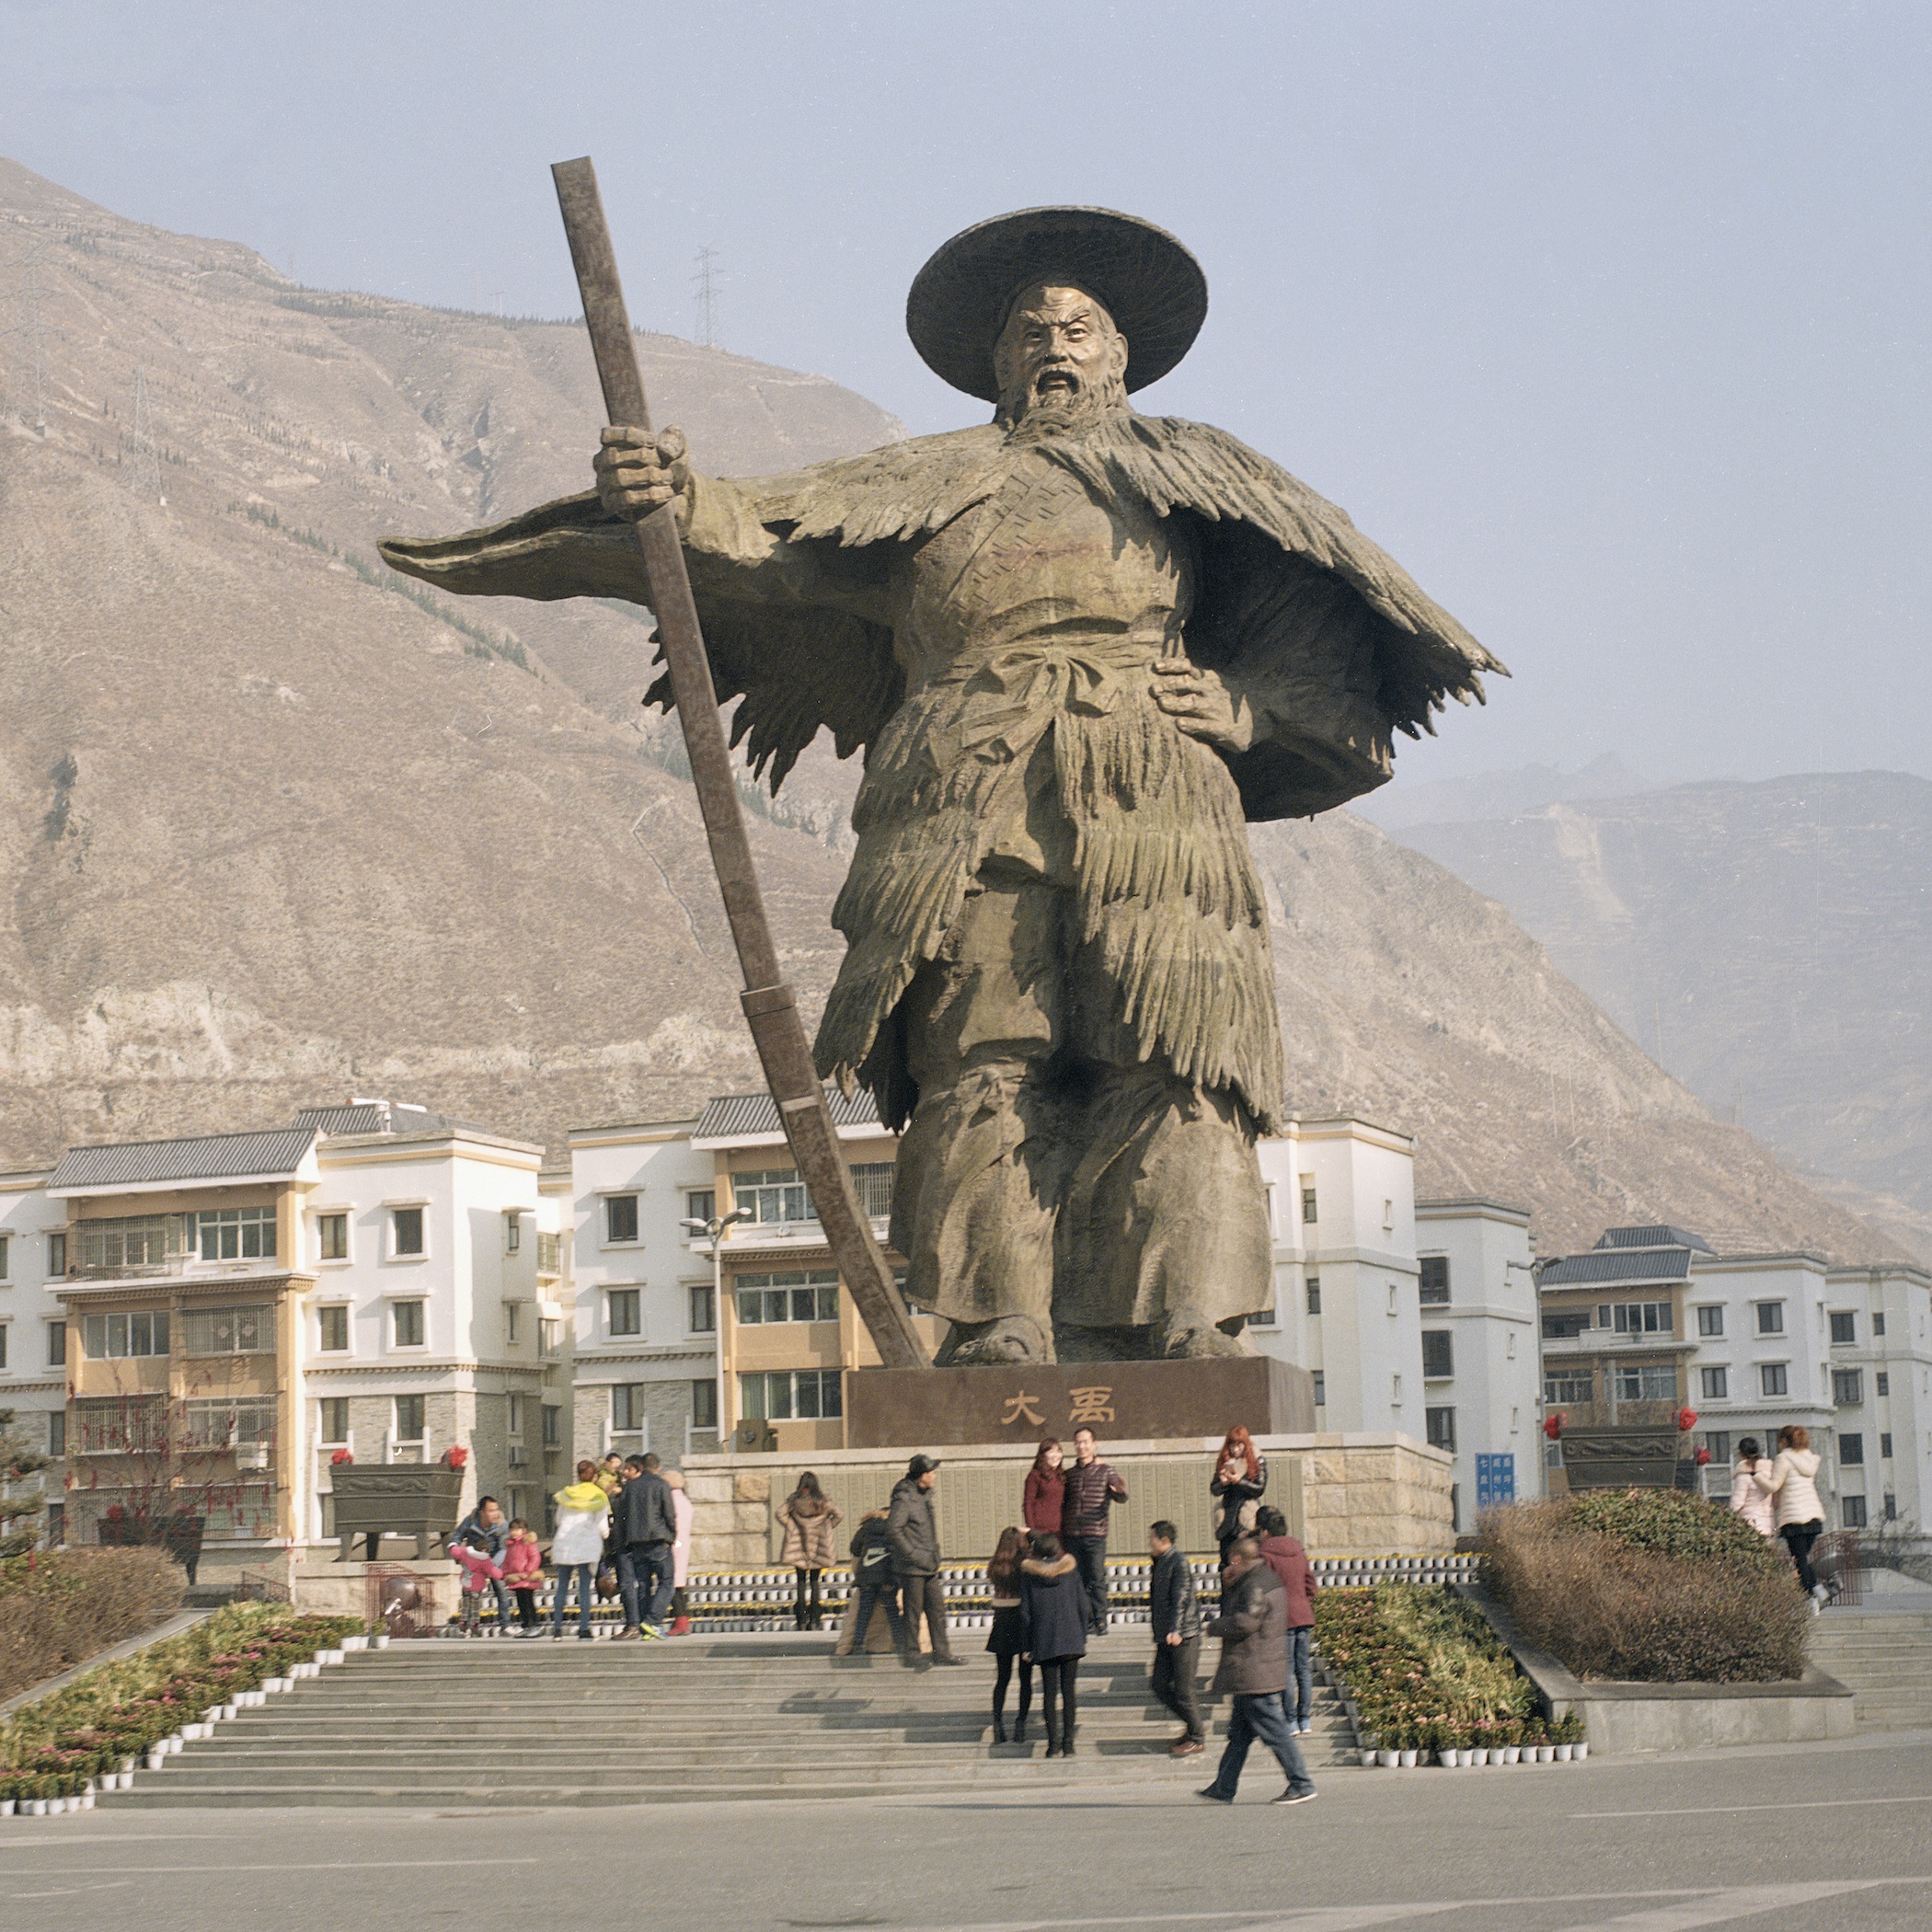 The Newly Constructed "Big Yu" Statue, Wenchuan, Sichuan, China, February 2016